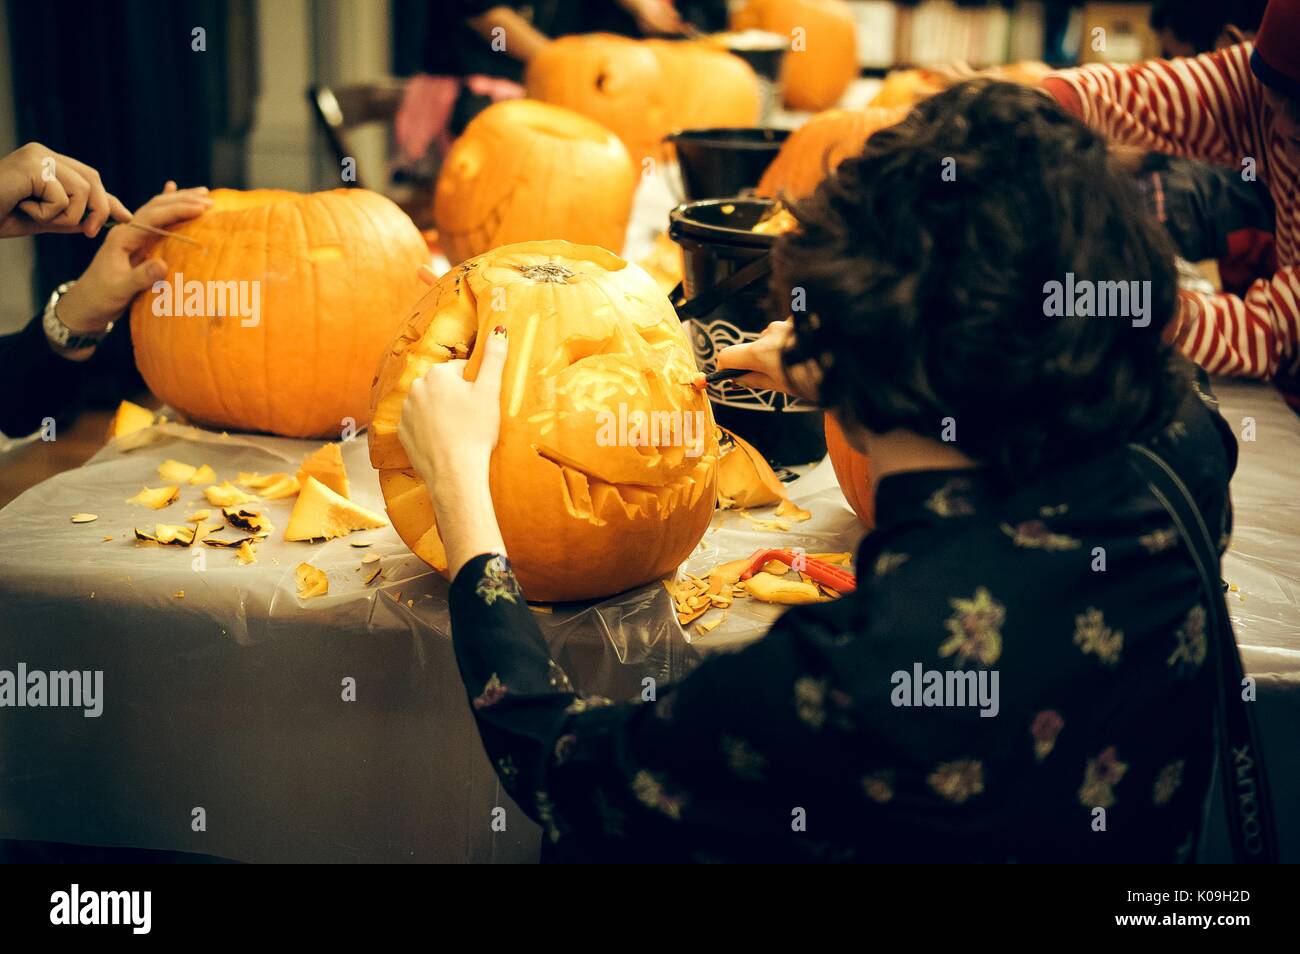 A college student is carving a pumpkin at a table full of pumpkins and other carvers, 2015. Courtesy Eric Chen. Stock Photo